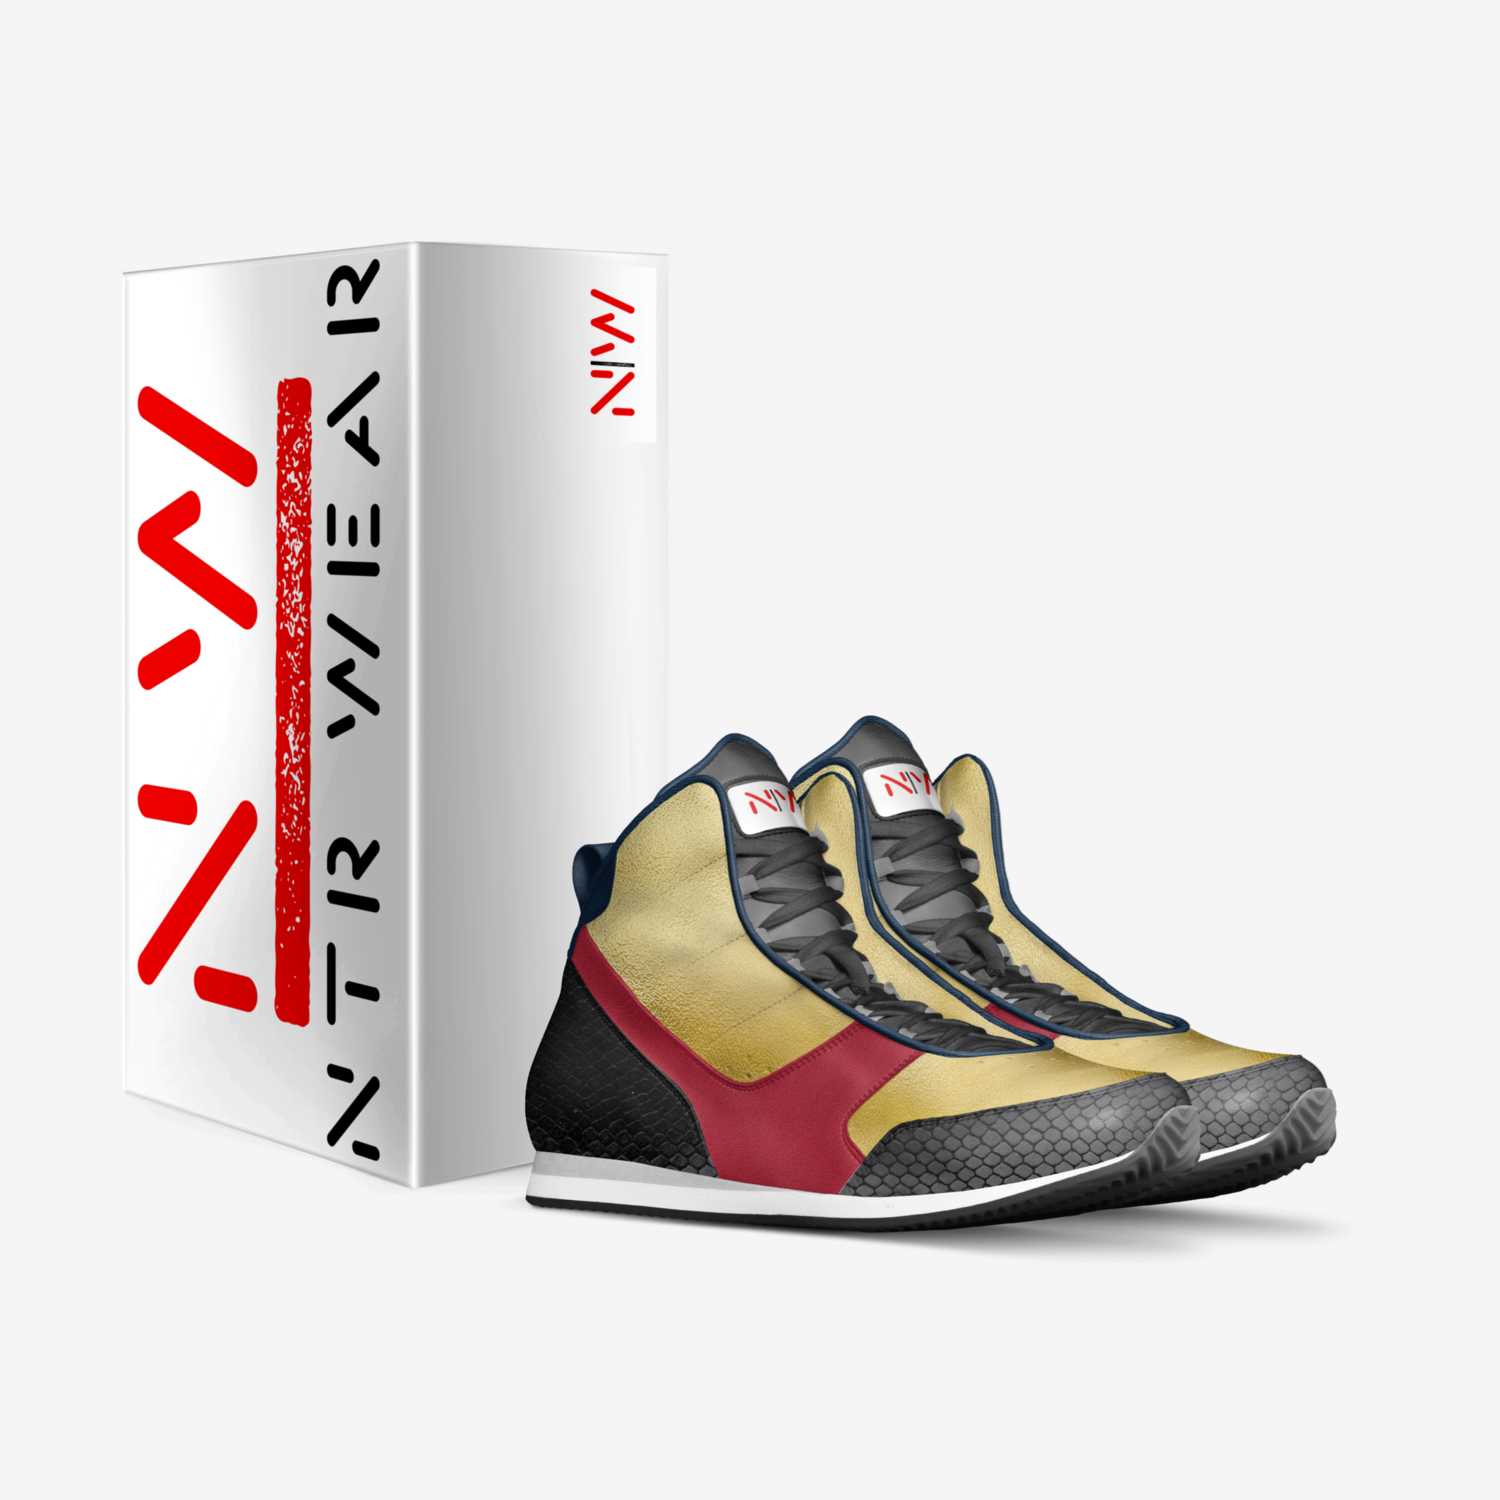 NTR WEAR custom made in Italy shoes by El Thutmose Tehuti | Box view